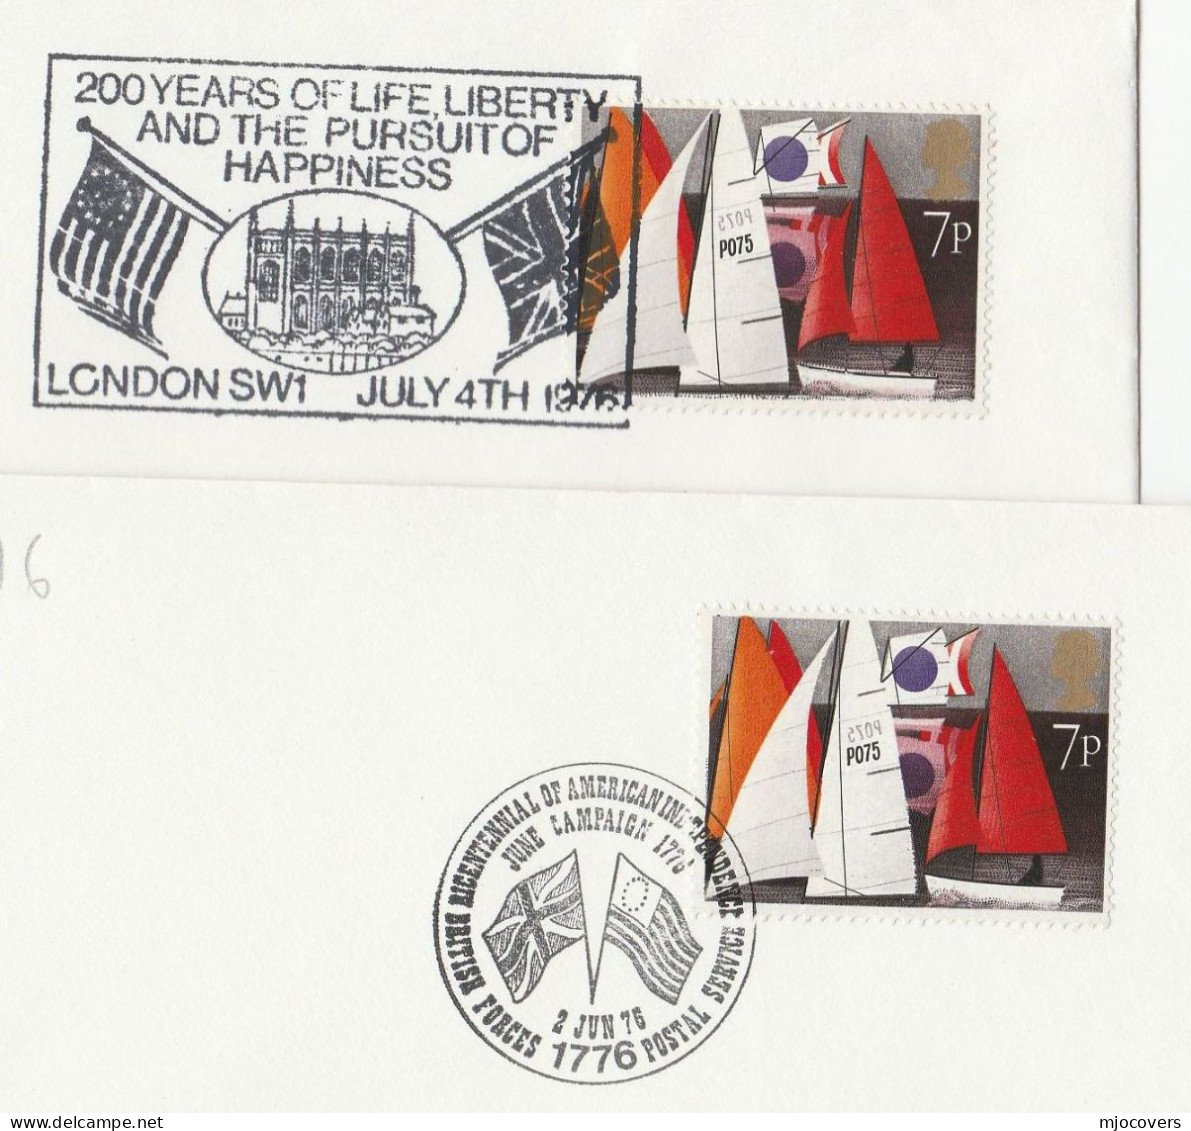 2 Diff 1976 GB US Bicentennial EVENT Covers BRITISH FORCES BFPS 1776 & London LIBERTY FLAG Cover Stamps Usa Independence - Indépendance USA